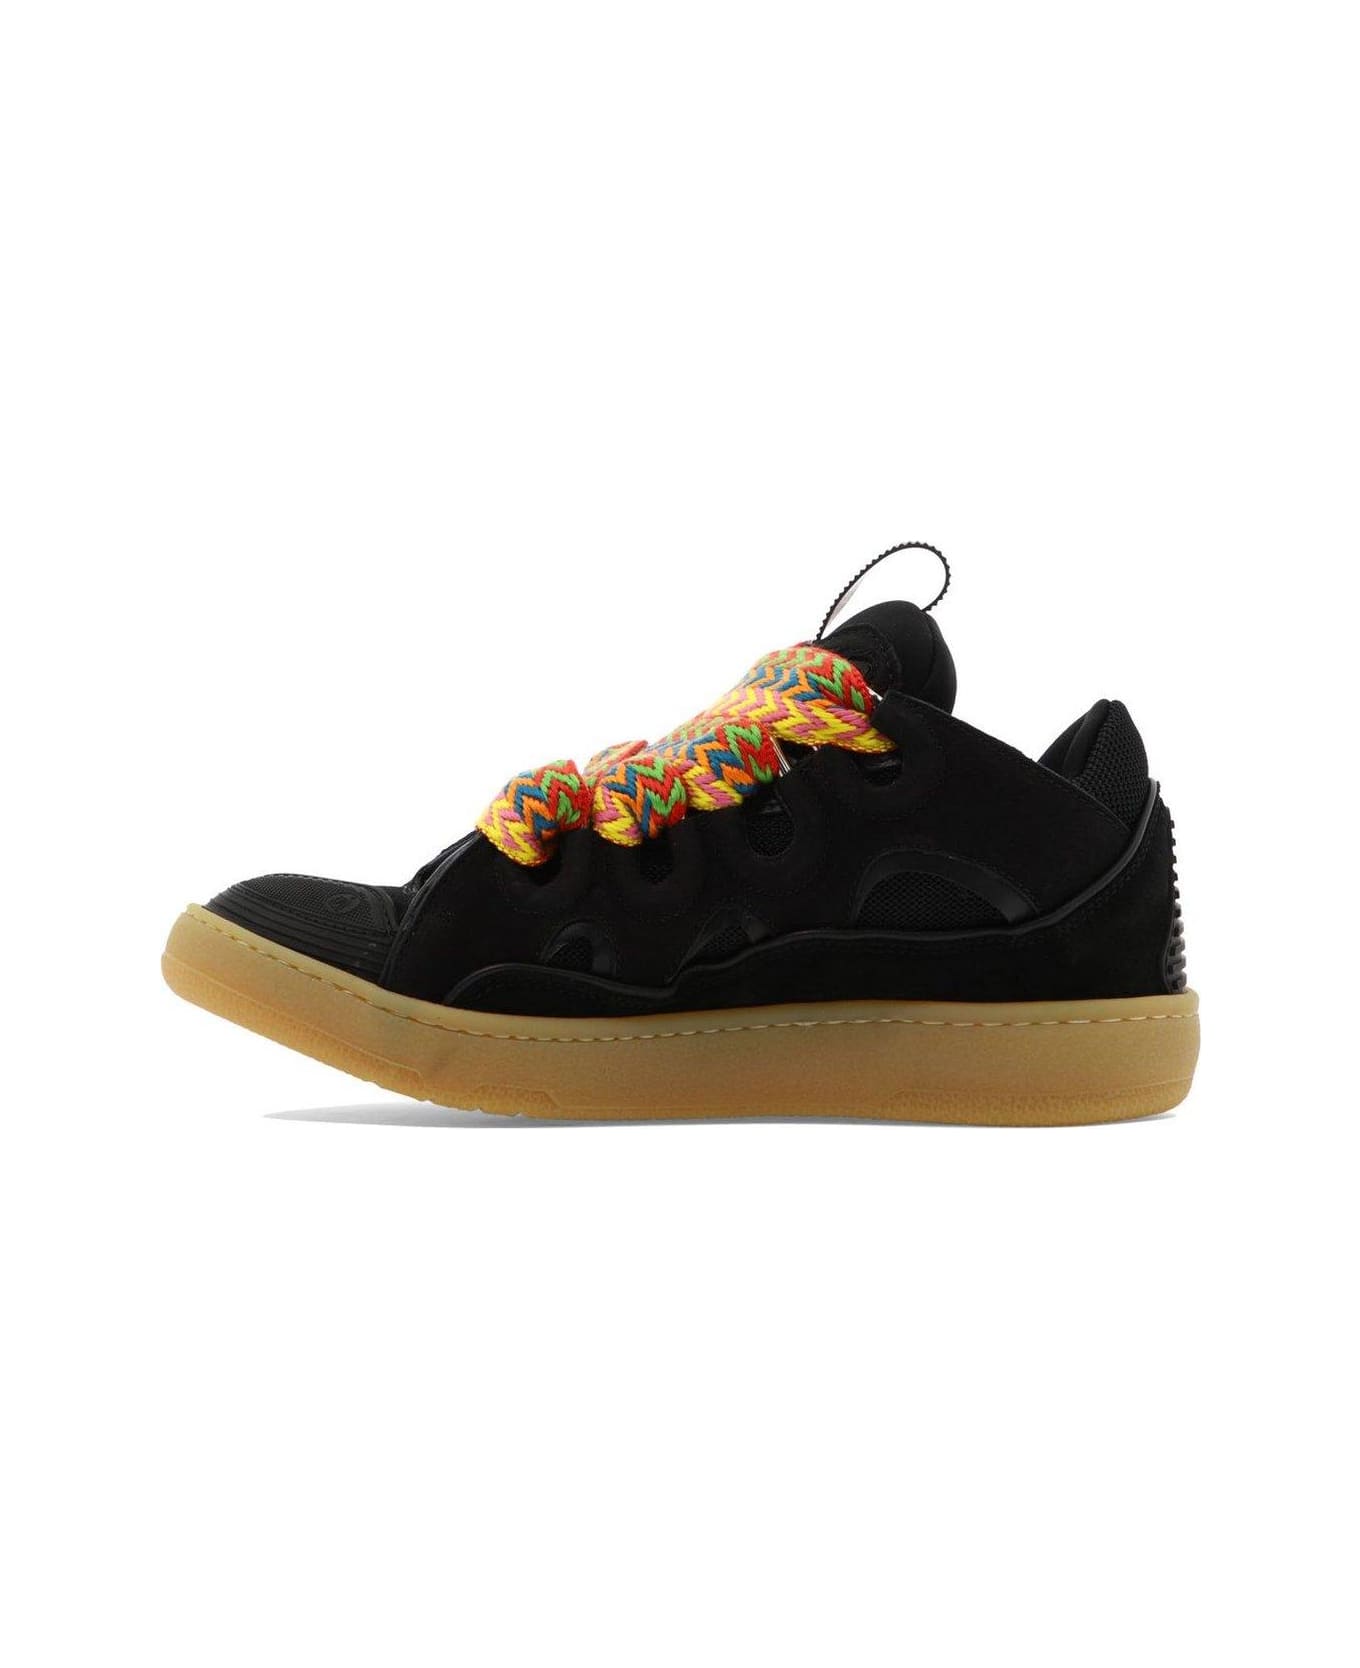 Lanvin Curb Panelled Lace-up Sneakers - Black スニーカー